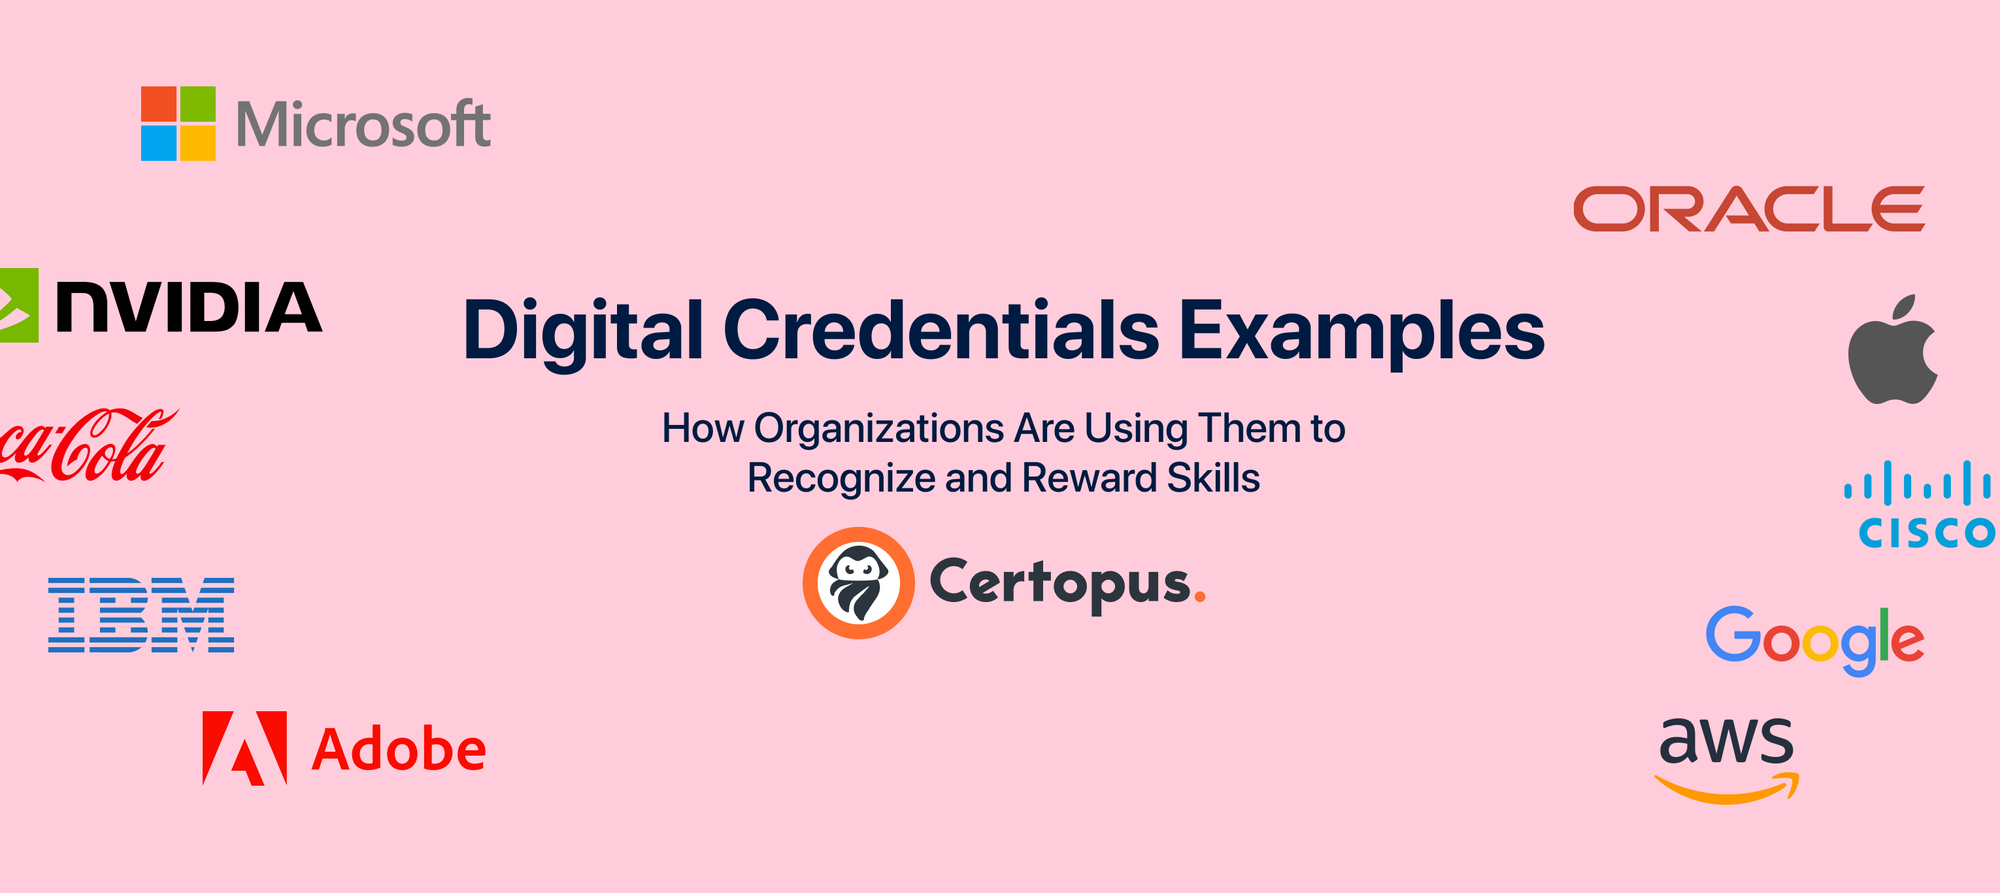 Digital Credentials Examples: How Organizations Are Using Them to Recognize and Reward Skills